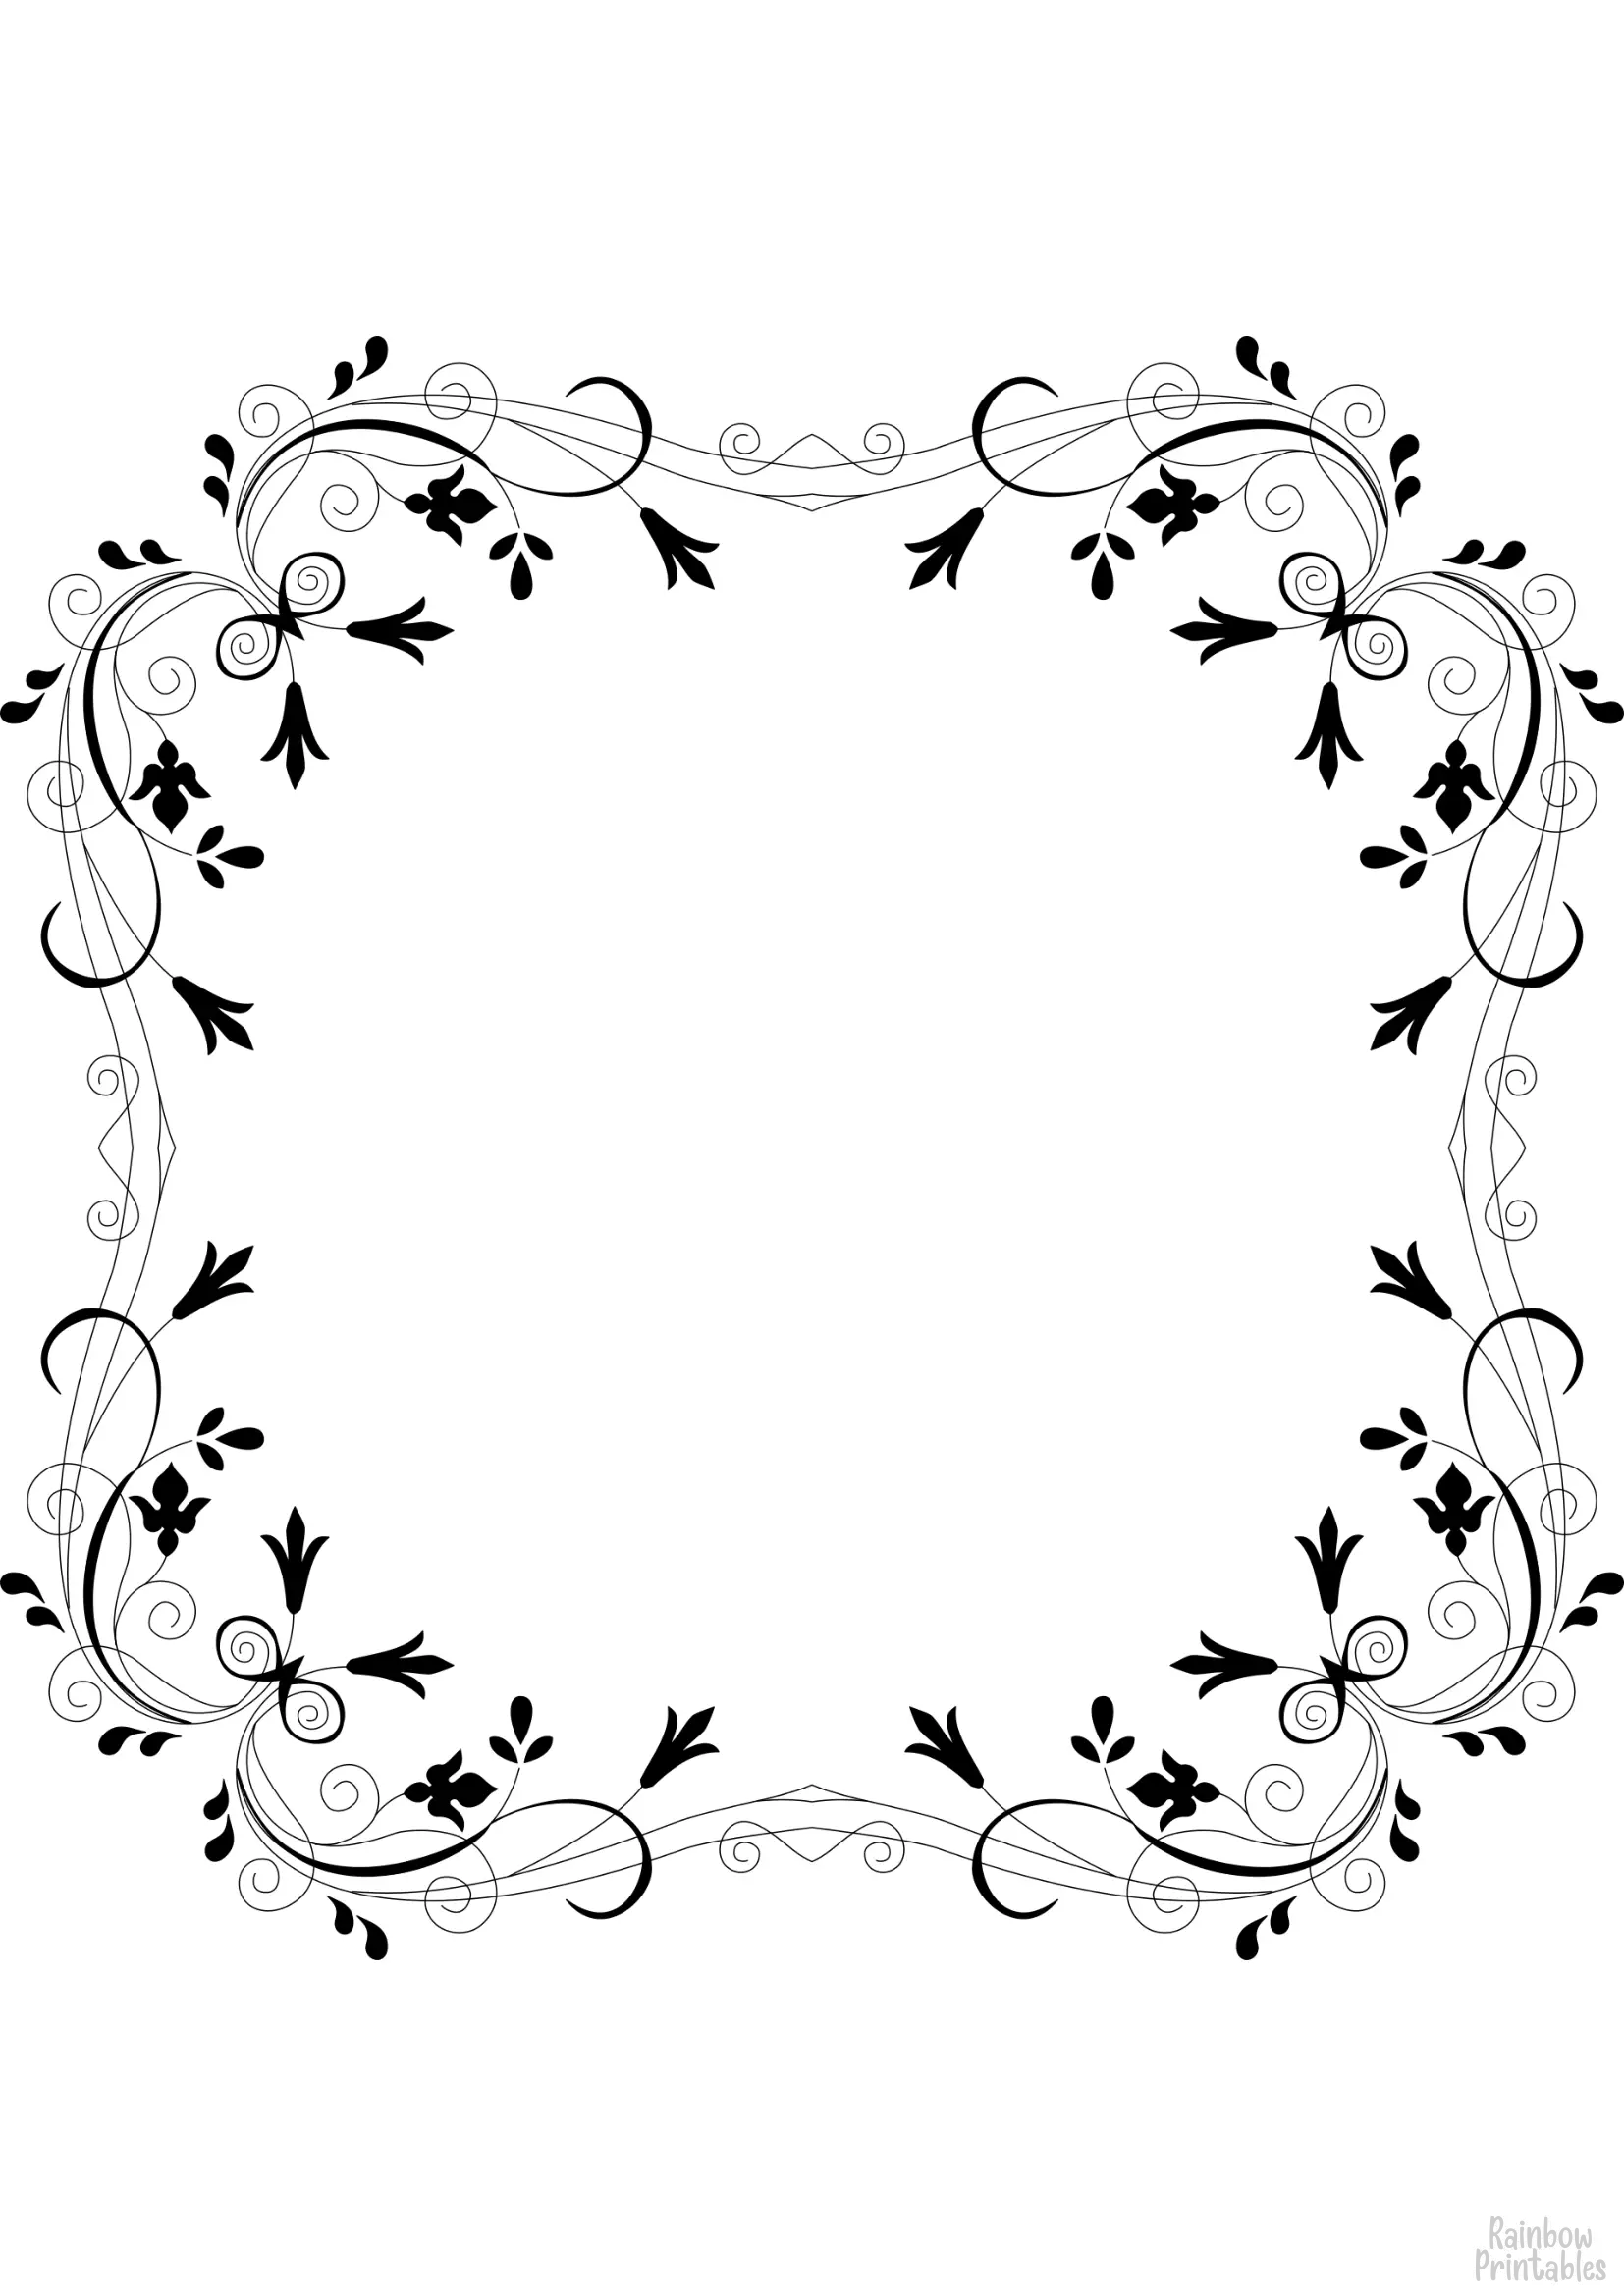 FLORAL Black Border Free Clipart Coloring Pages for Kids Adults Art Activities Line Art